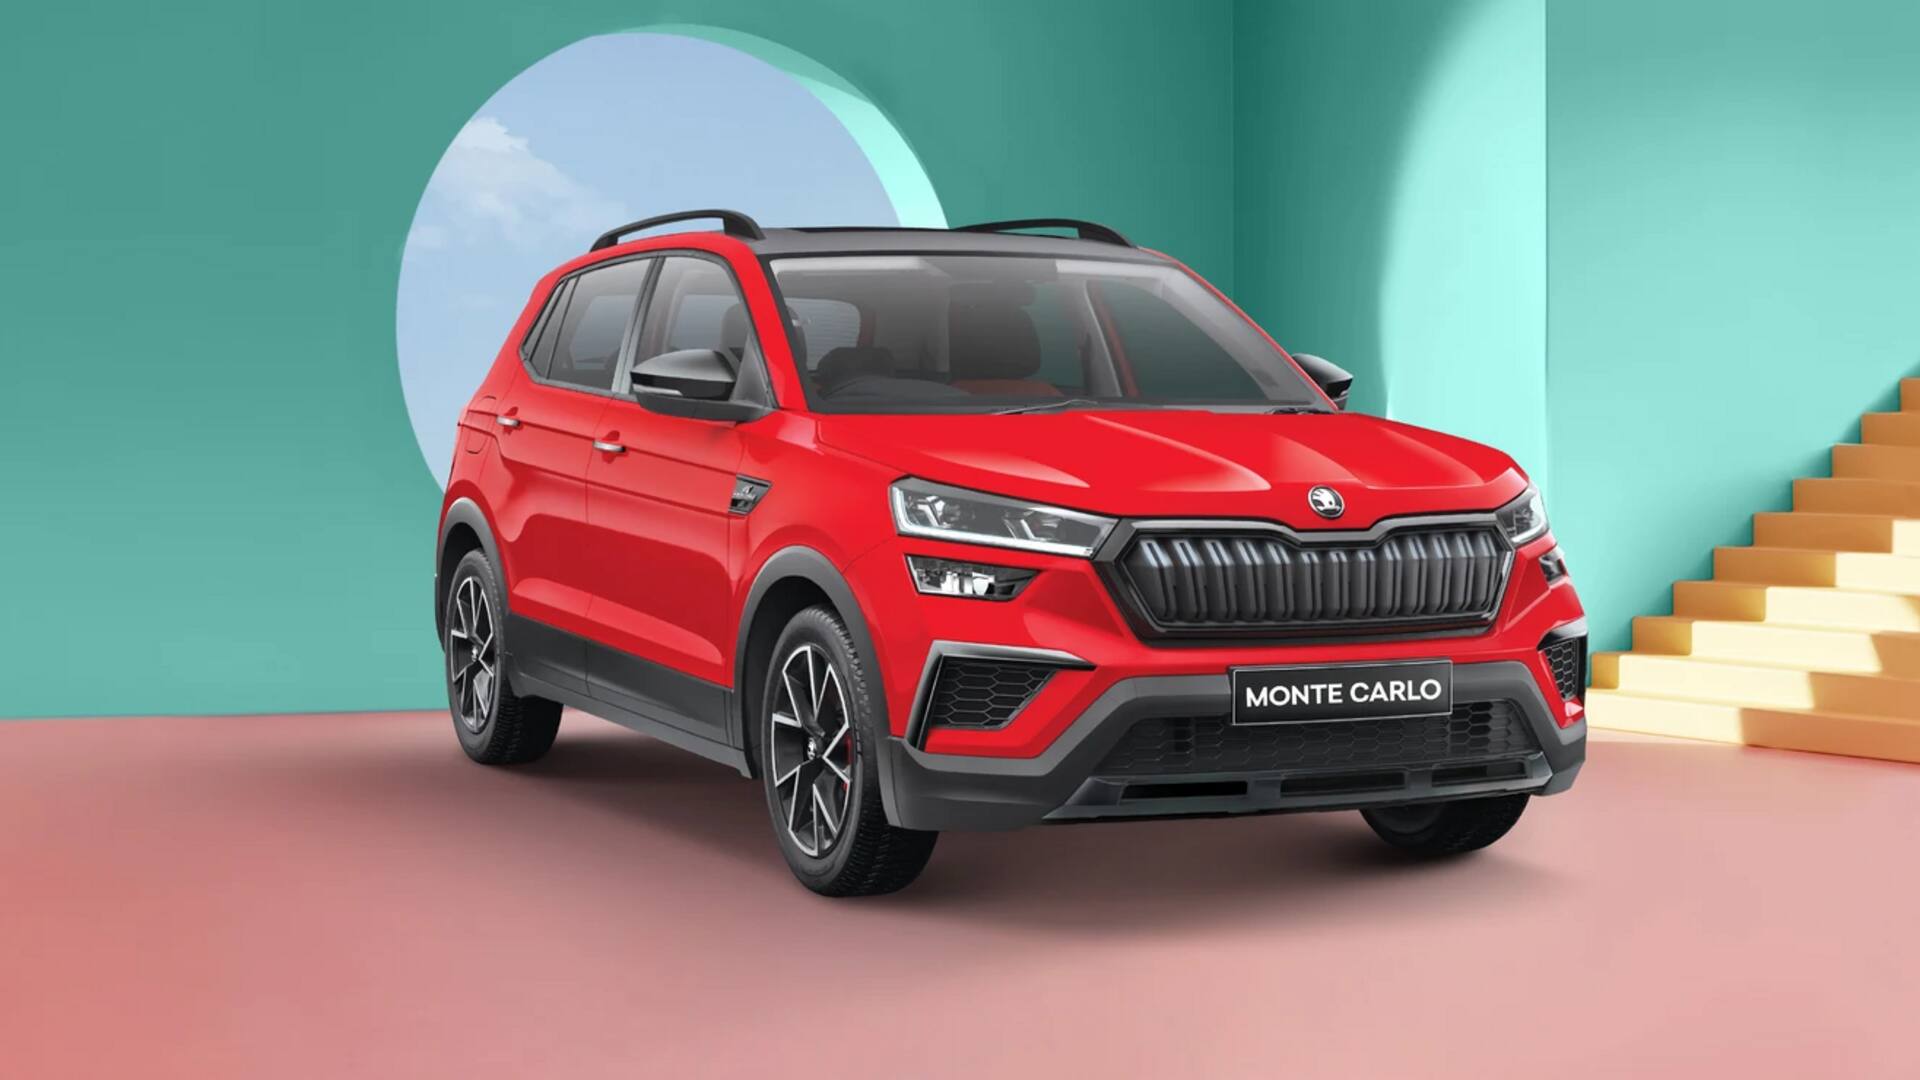 SKODA KUSHAQ Monte Carlo updated with two new features